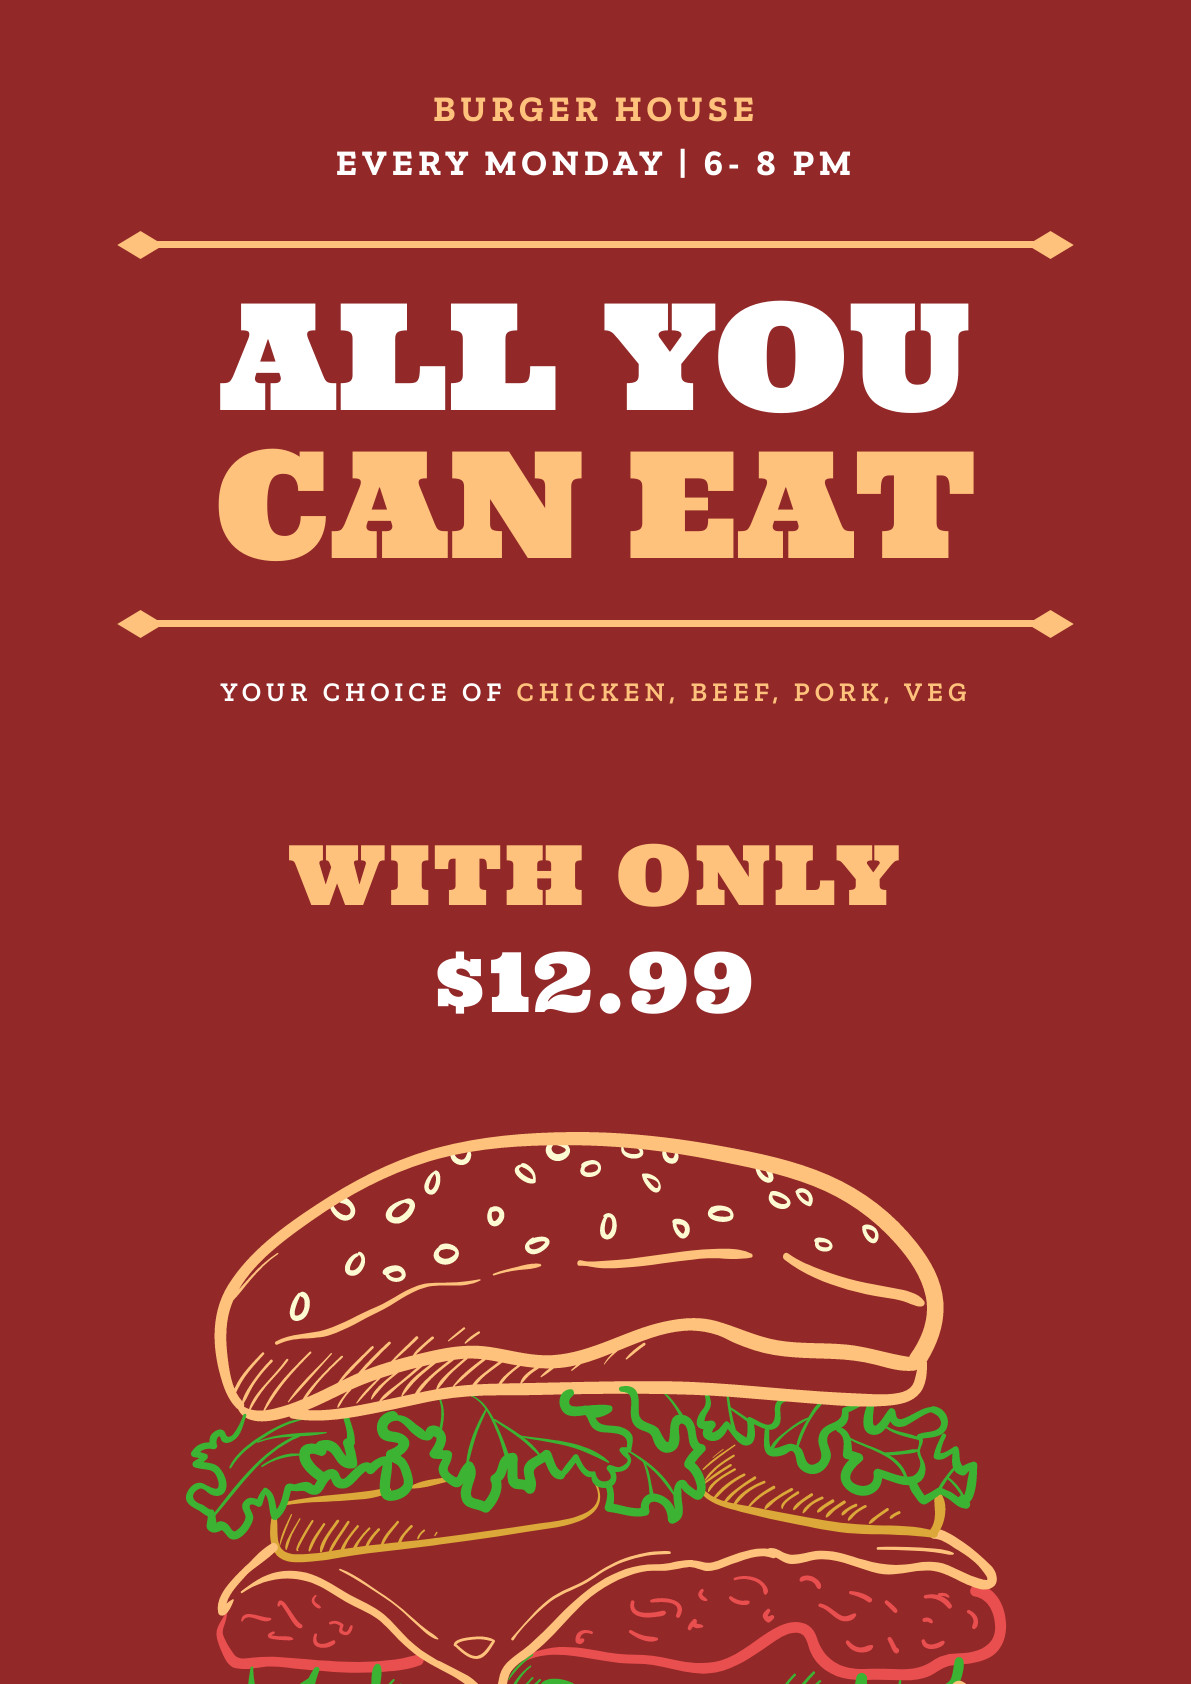 Burger House All You Can Eat – Poster Template 1191x1684